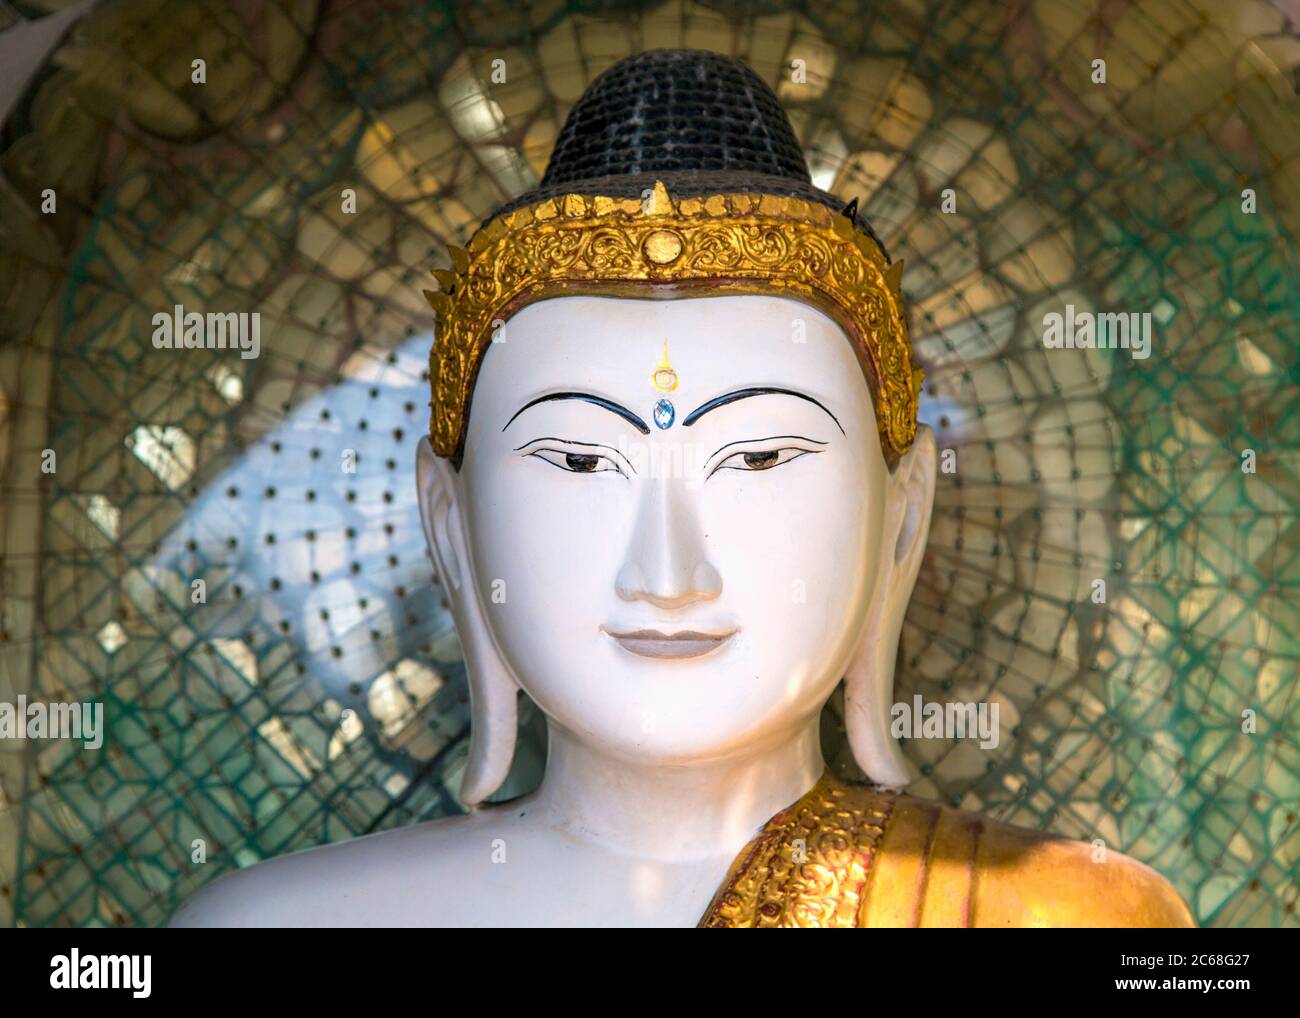 Close-up view of the face of a Buddha Statue in the Shwedagon Pagoda, Yangon, Myanmar Stock Photo